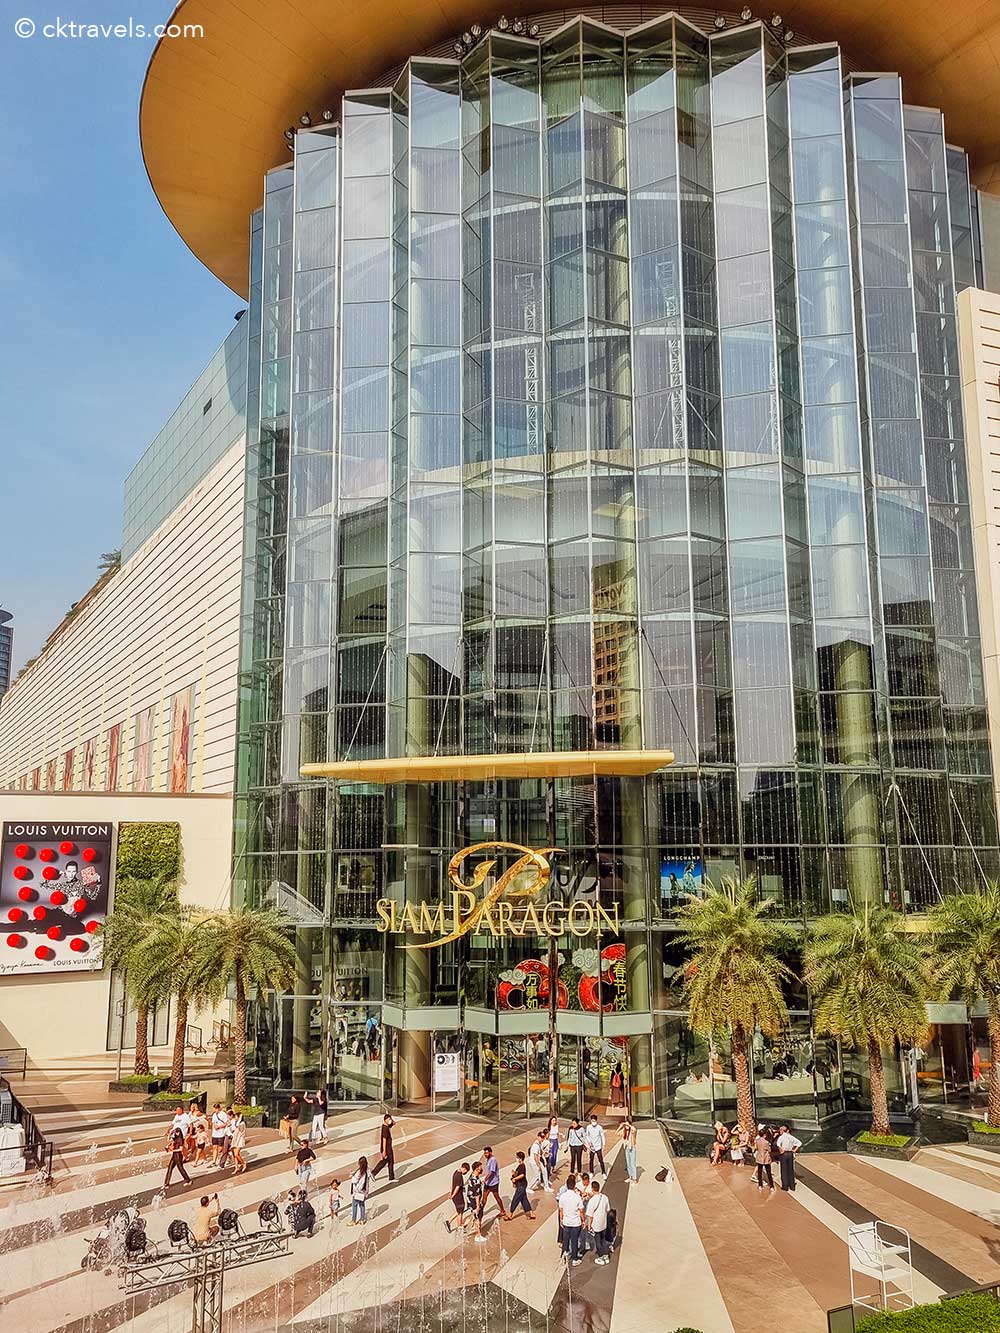 Largest Malls of the World - IconSiam, Siam Paragon - 1/18/19